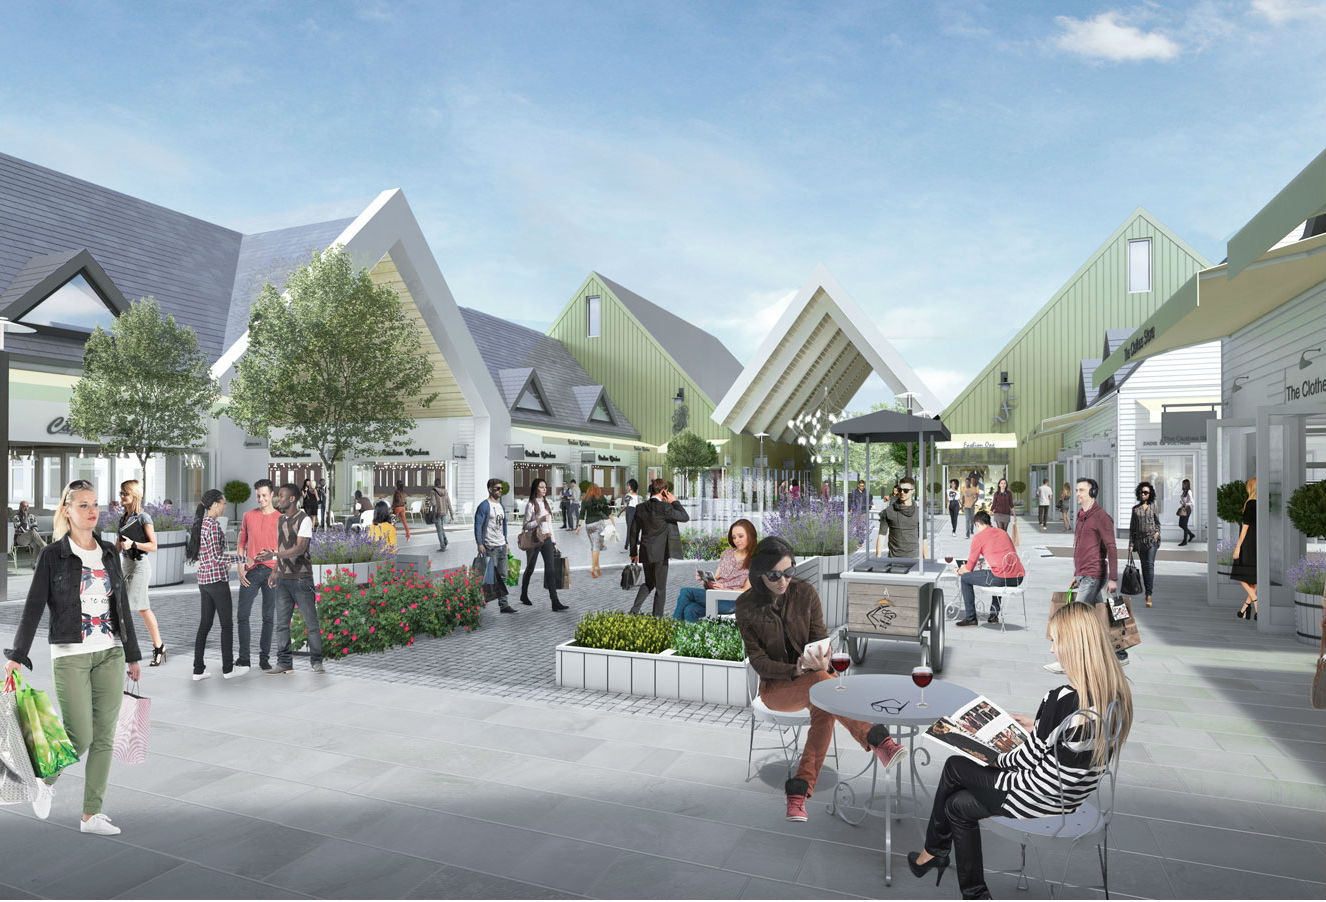 Coming soon: A brand new designer outlet village in the middle of Lincolnshire - Retail Gazette